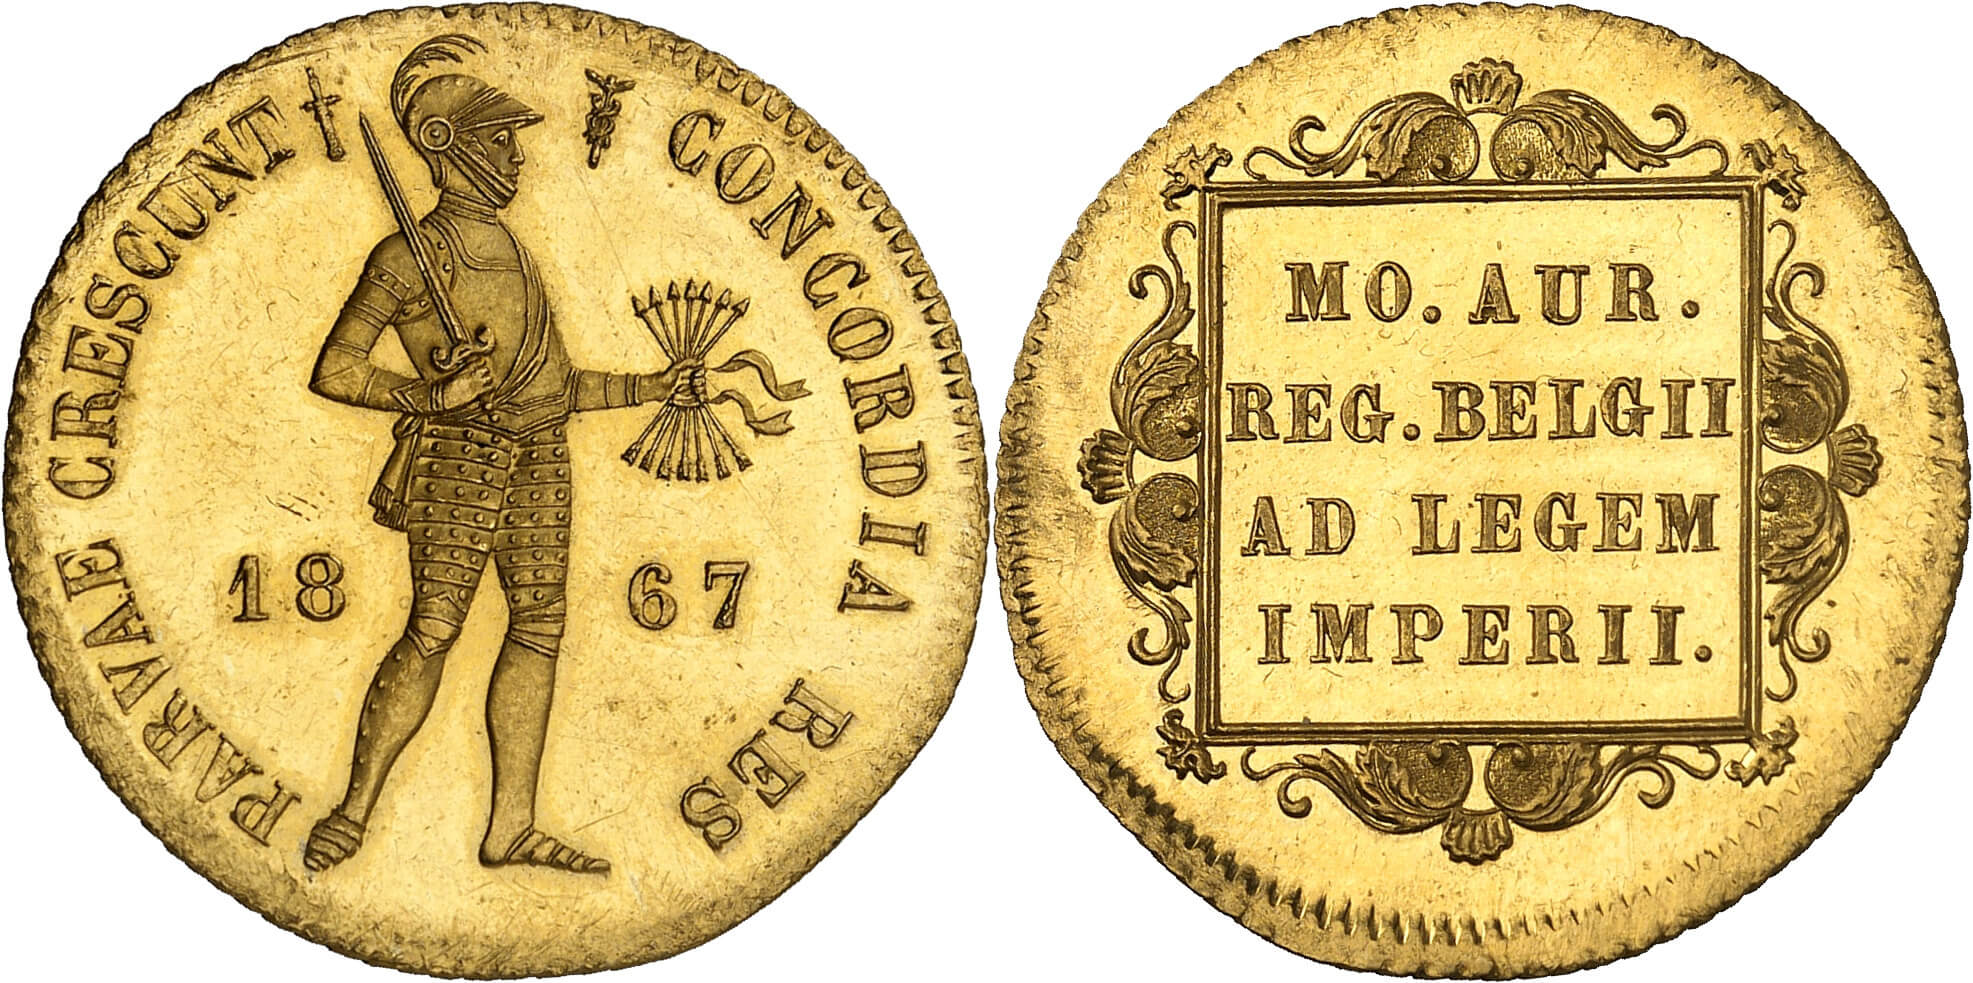 No. 3465. Netherlands. William III, 1849-1890. 2 ducats, 1867, Utrecht. Only 8 specimens are known of. Purchased in 1985 from Jacques Schulman. Estimate: 40,000 euros. Hammer price: 200,000 euros.